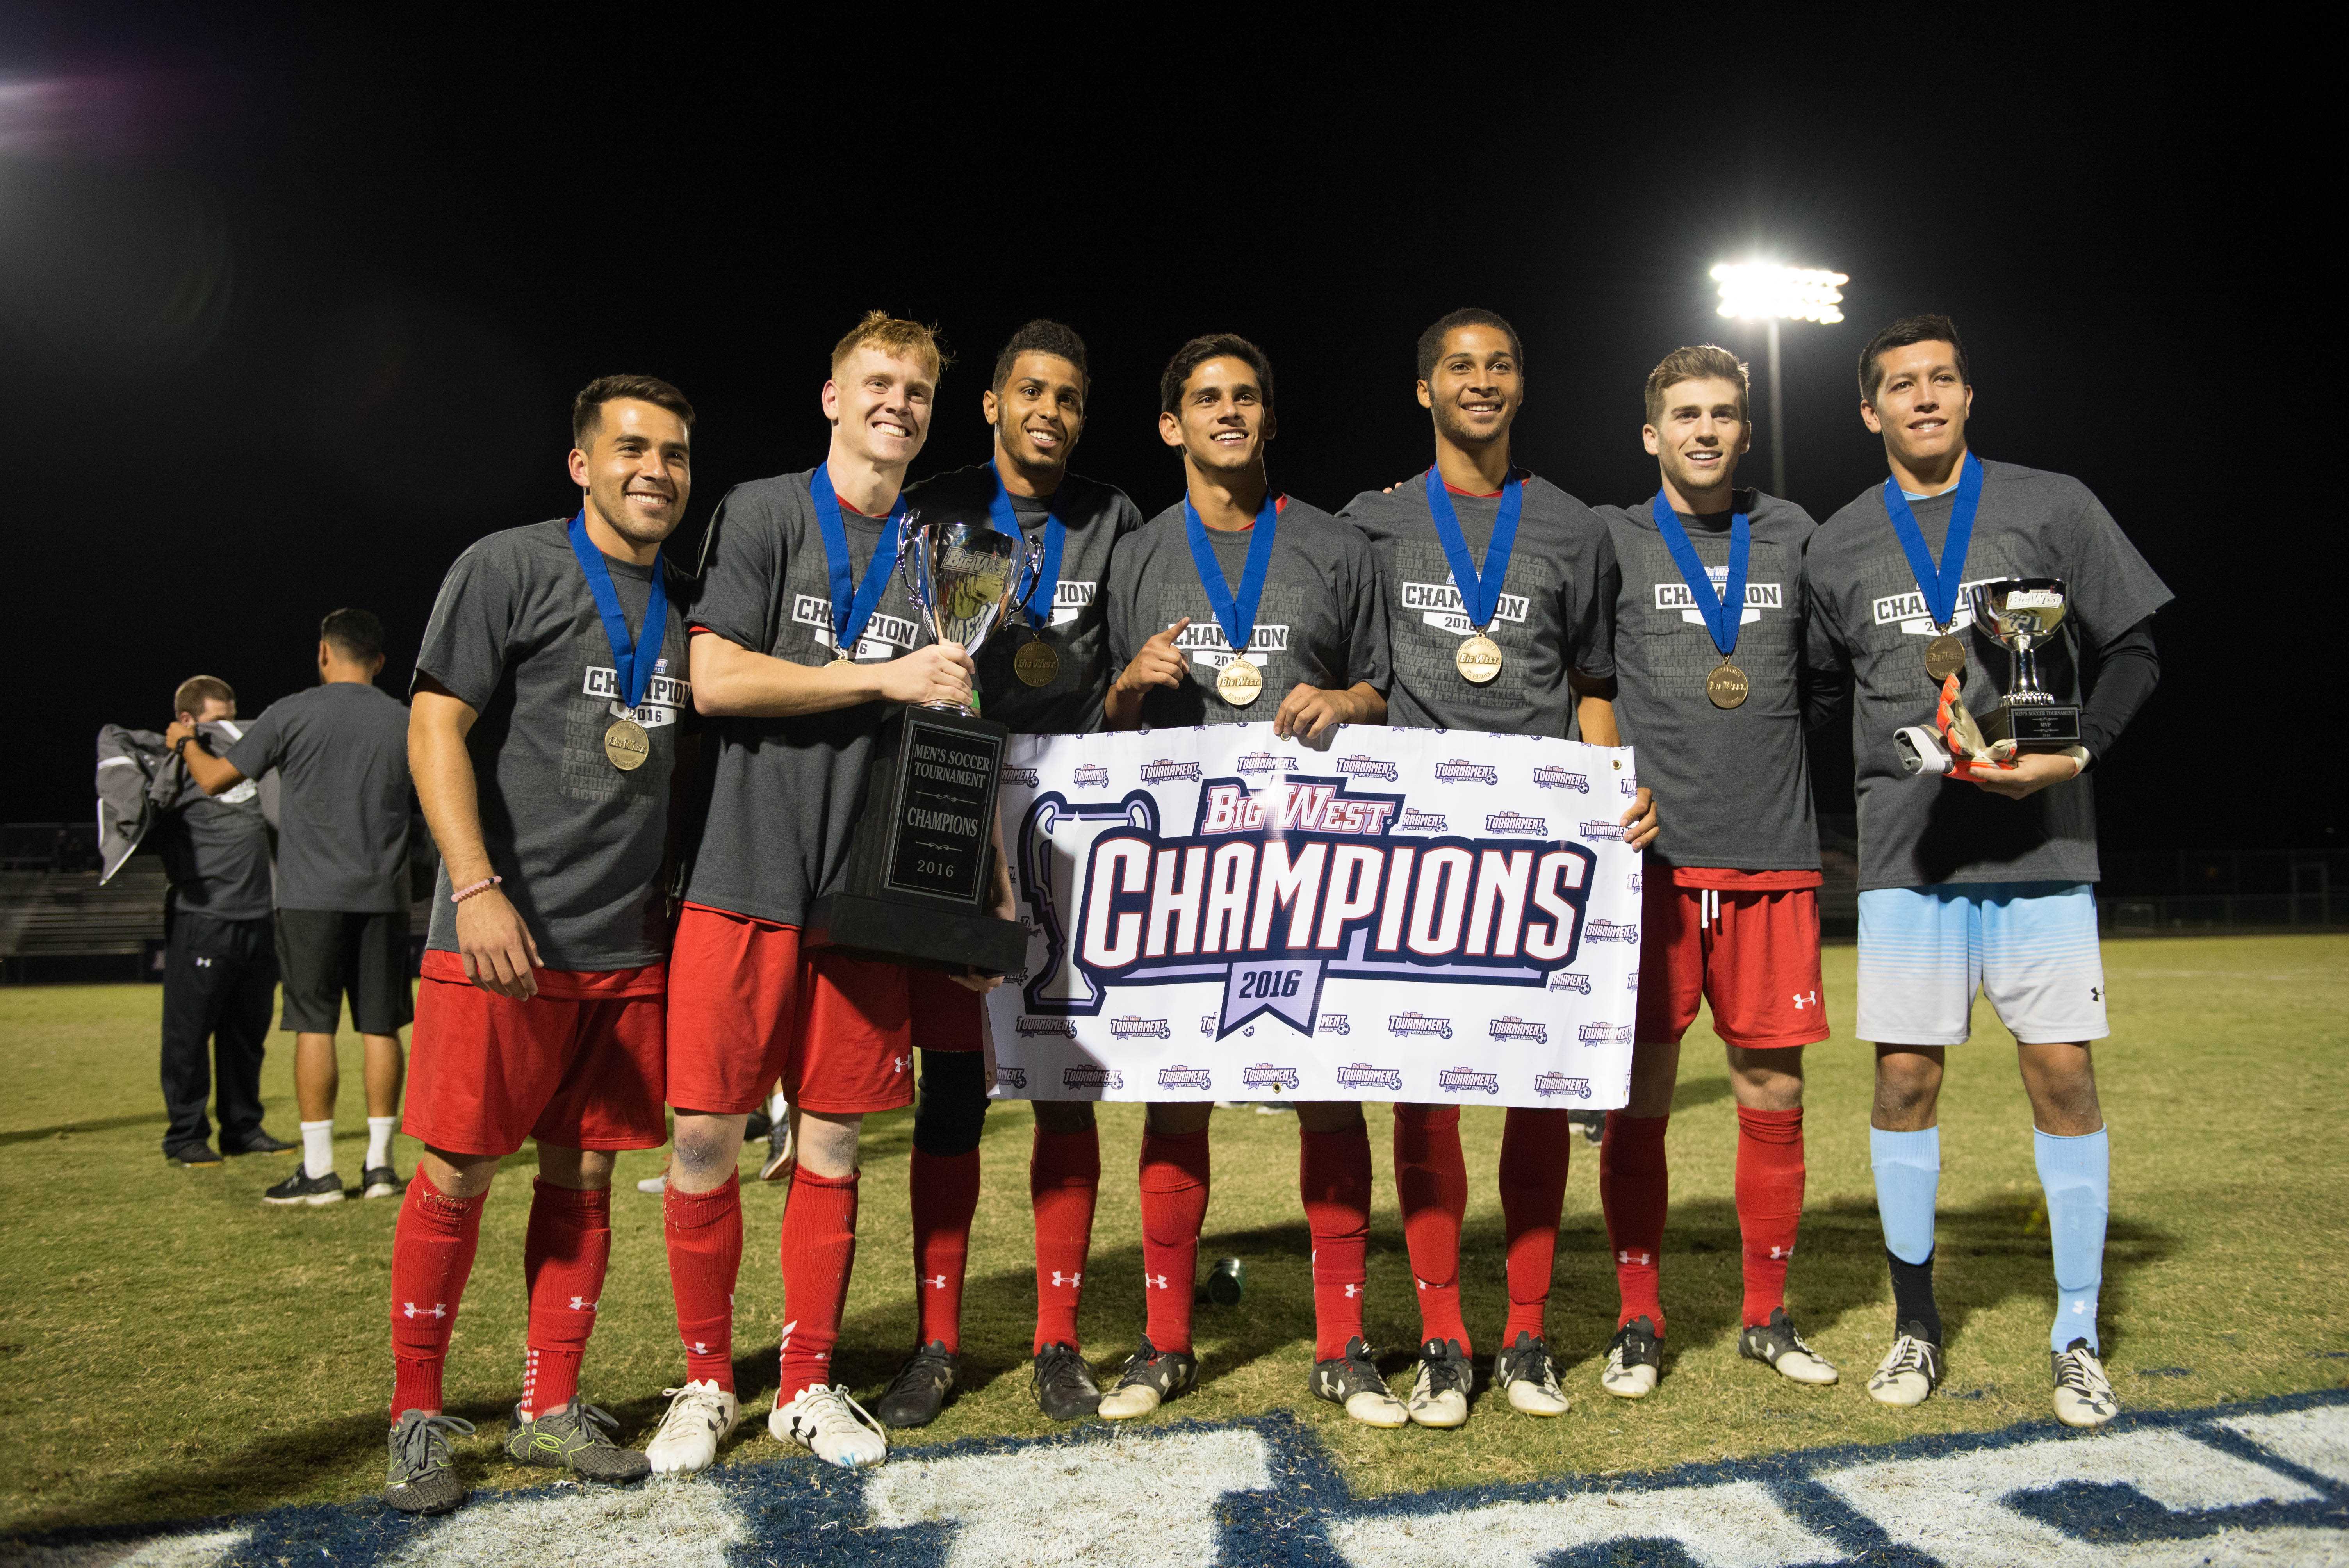 The seniors stand together with their medals in celebration of winning the Big West Tournament. Photo Credit: Alejandro Aranda/ The Sundial 